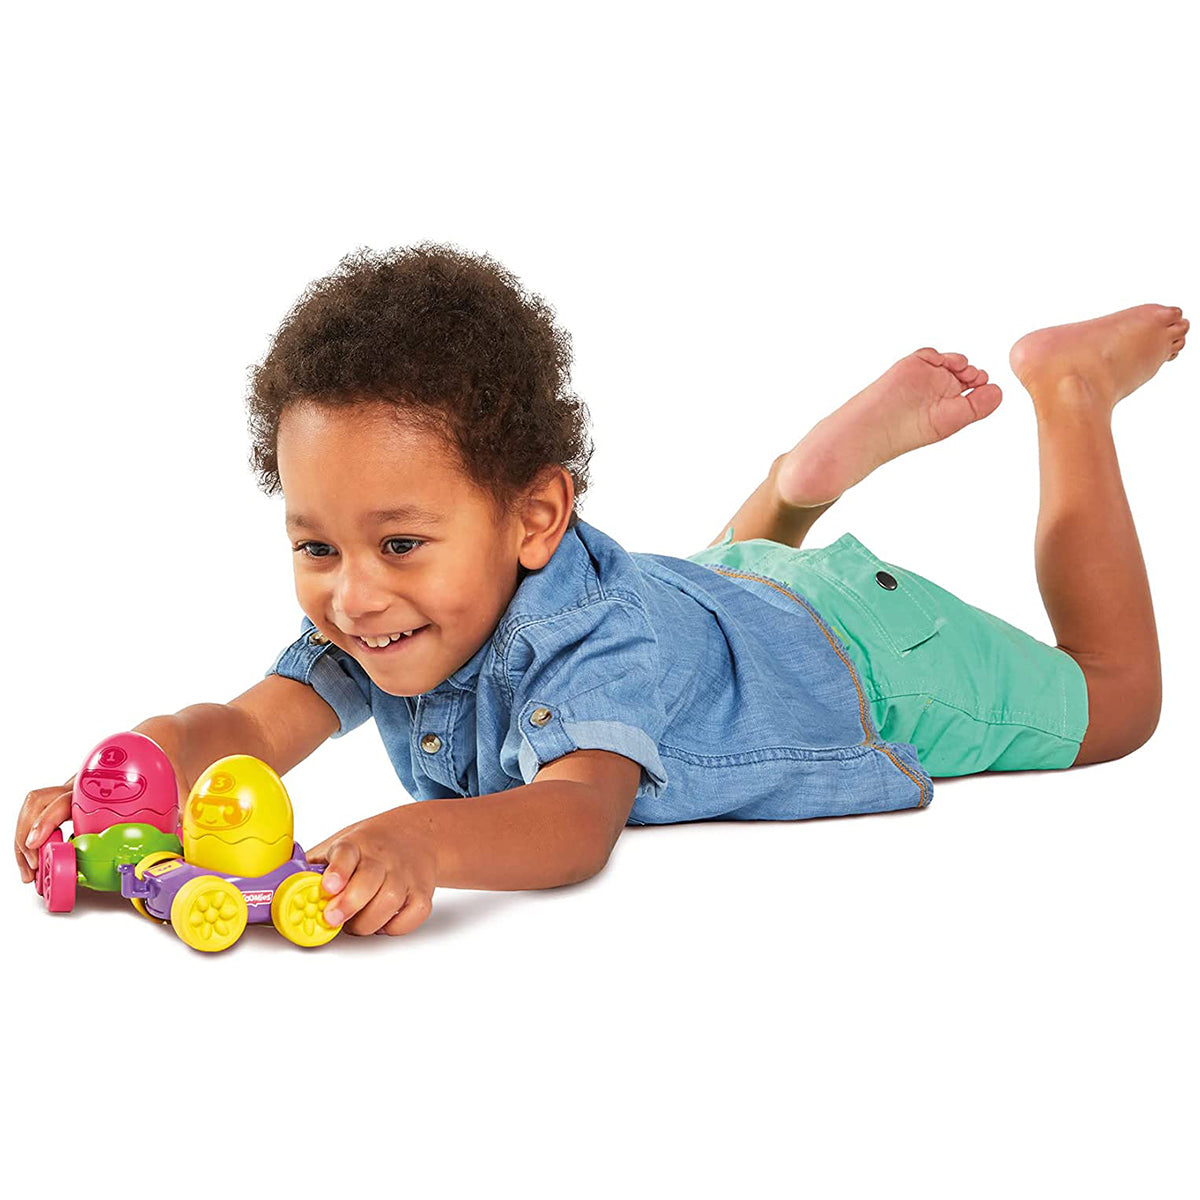 Toomies Egg Racers Assortment (Sold Separately Subject To Availability)